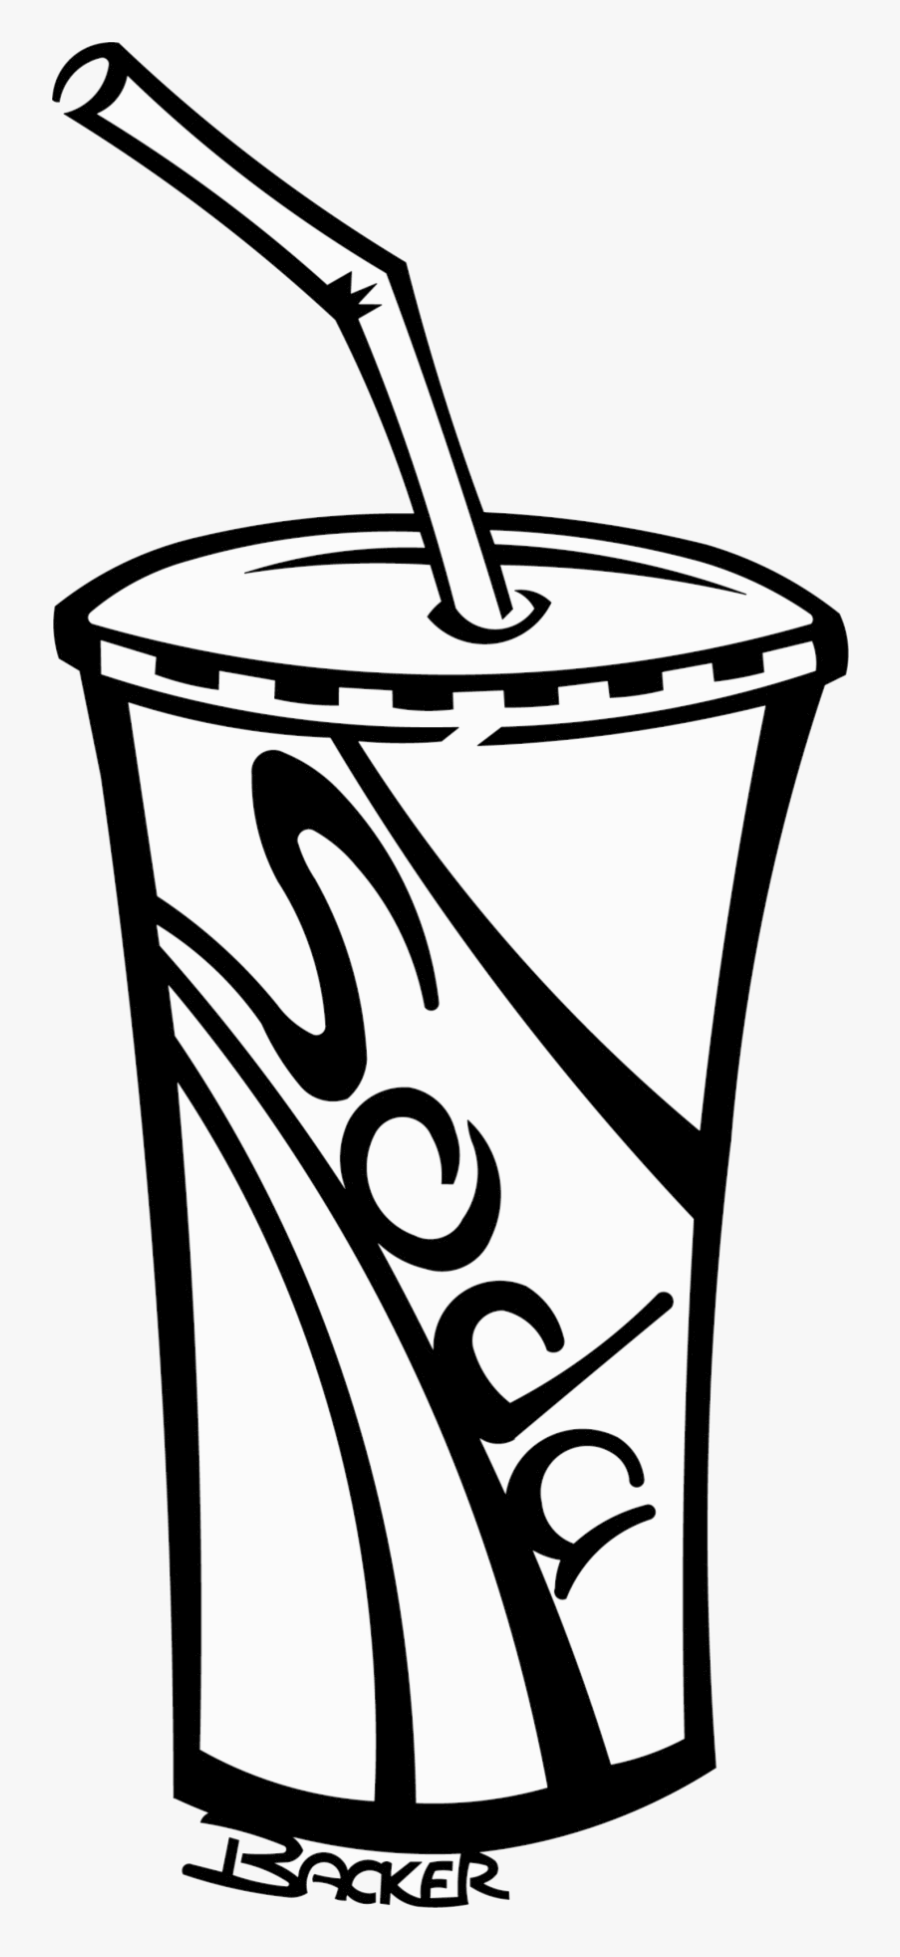 Soda Cup Soft Drinks Clipart Black And White Free Transparent - Drink Cup Clip Art, Transparent Clipart